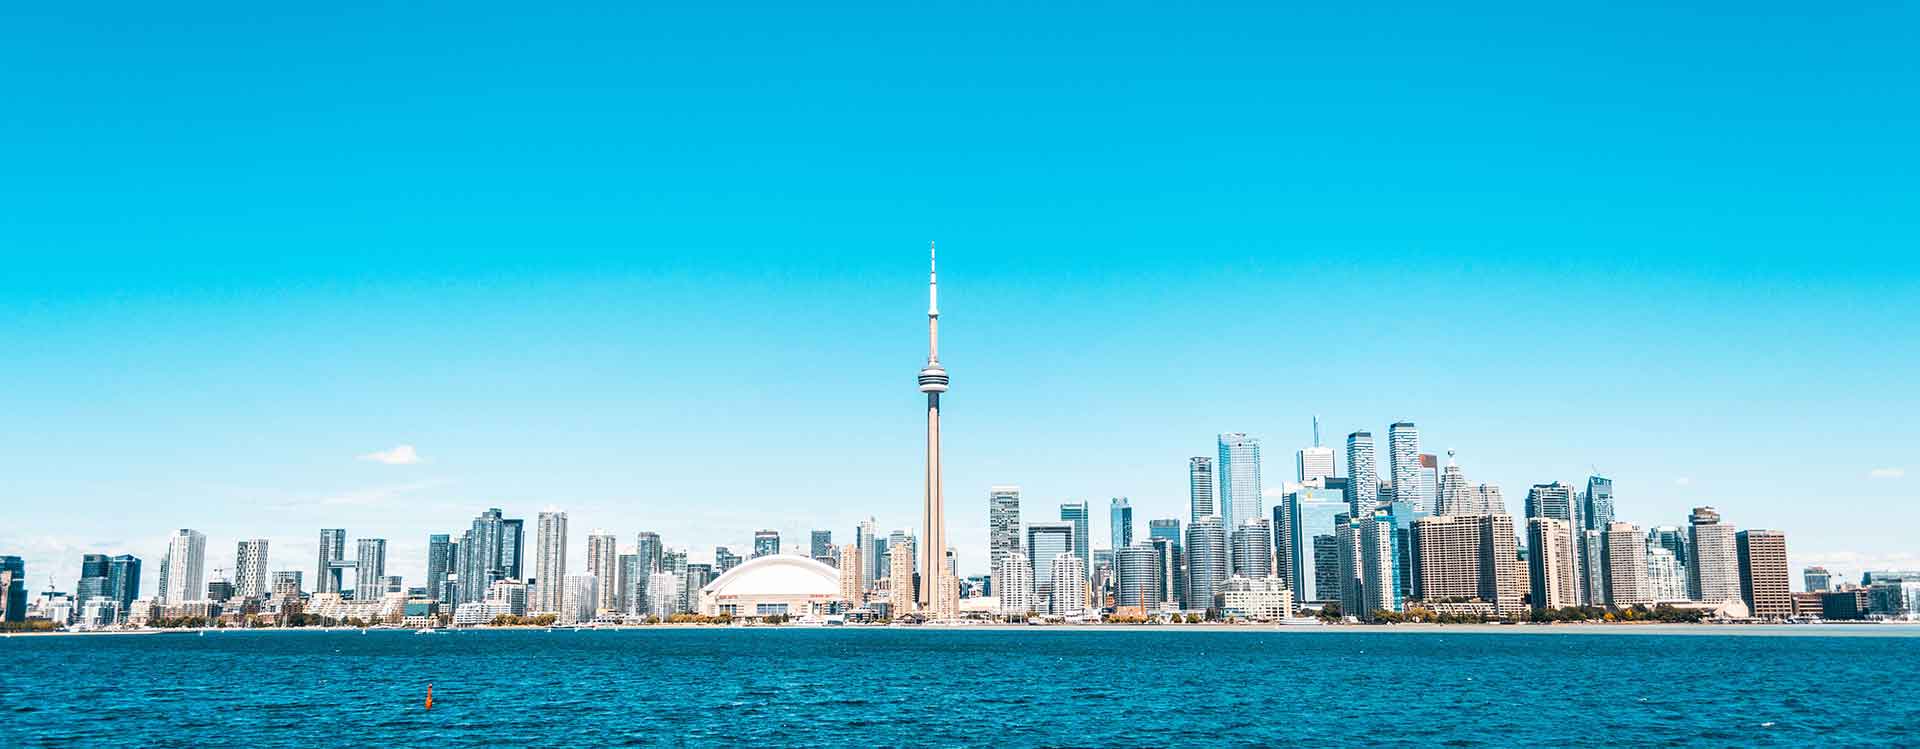 Featured Image - SPS Toronto 2019